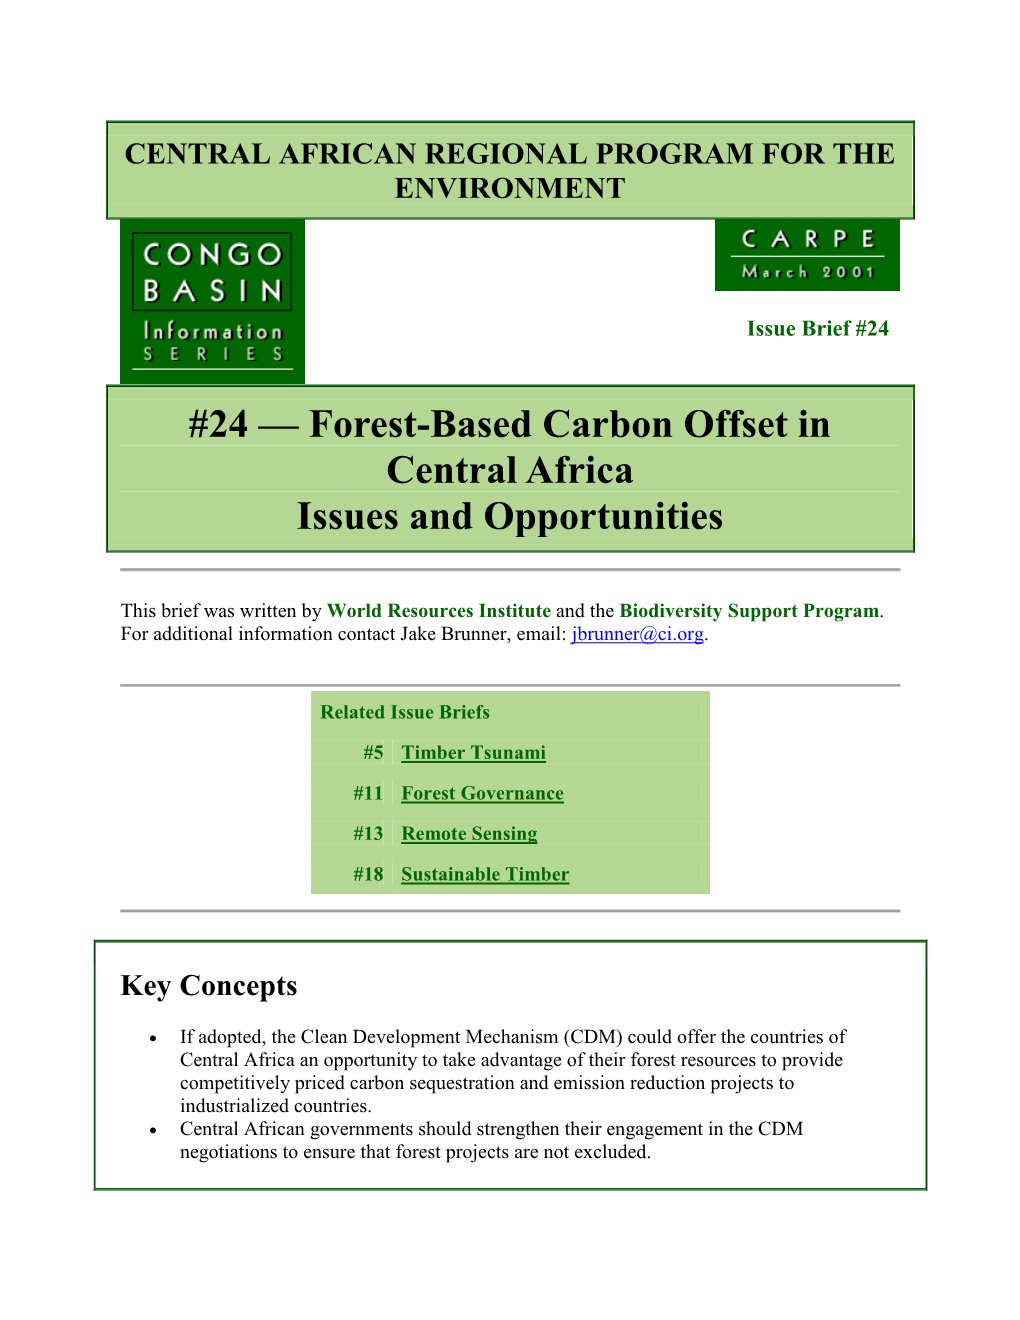 24 — Forest-Based Carbon Offset in Central Africa Issues and Opportunities